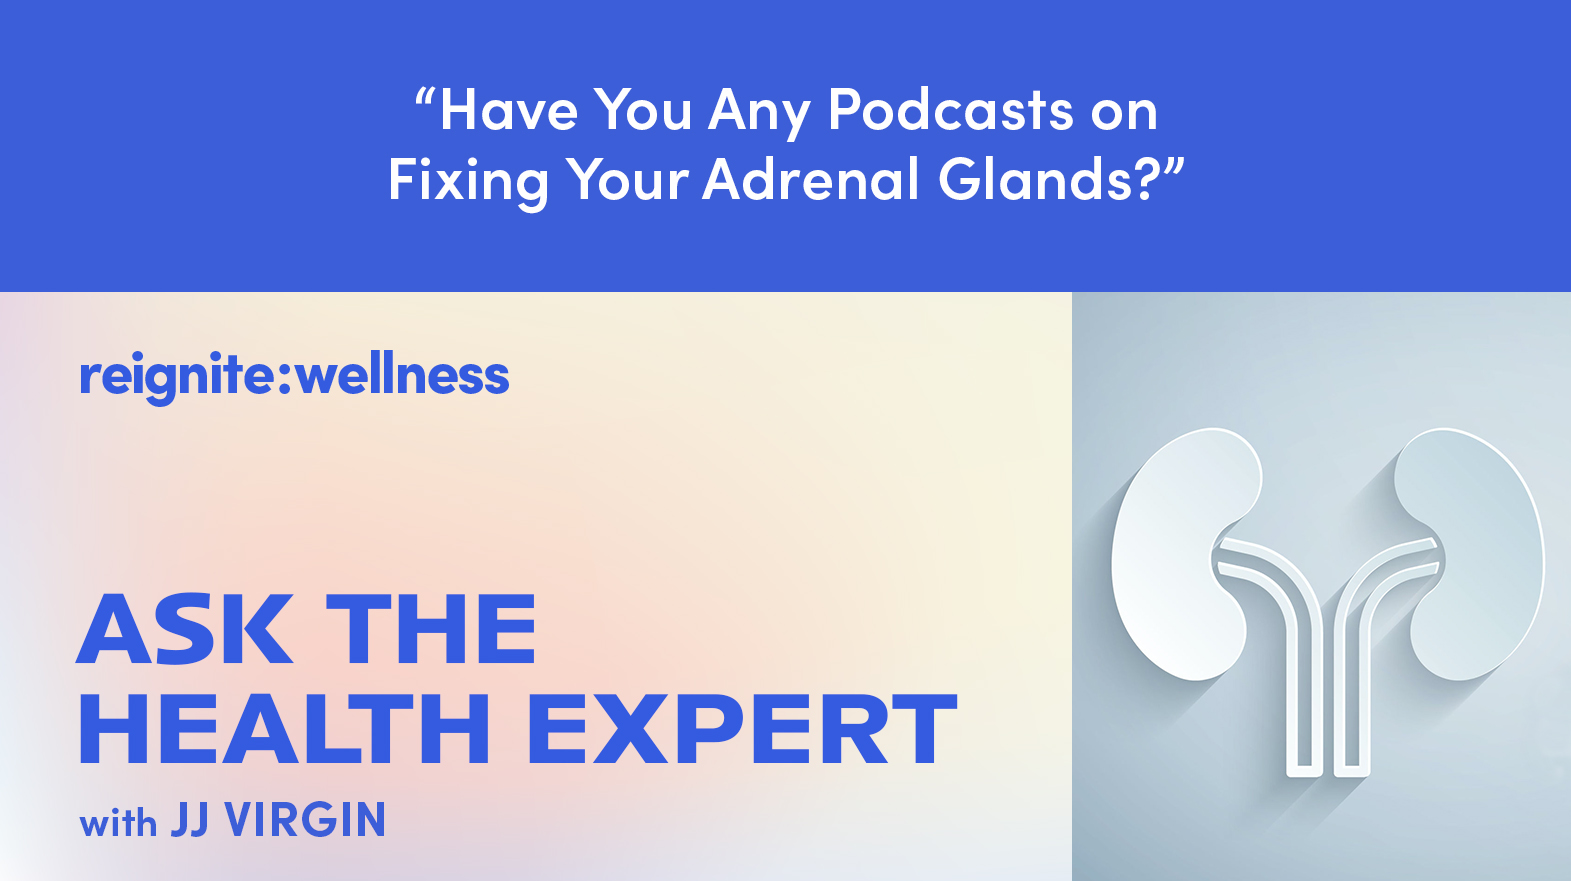 Have You Any Podcasts on Fixing Your Adrenal Glands? | Ep. 271